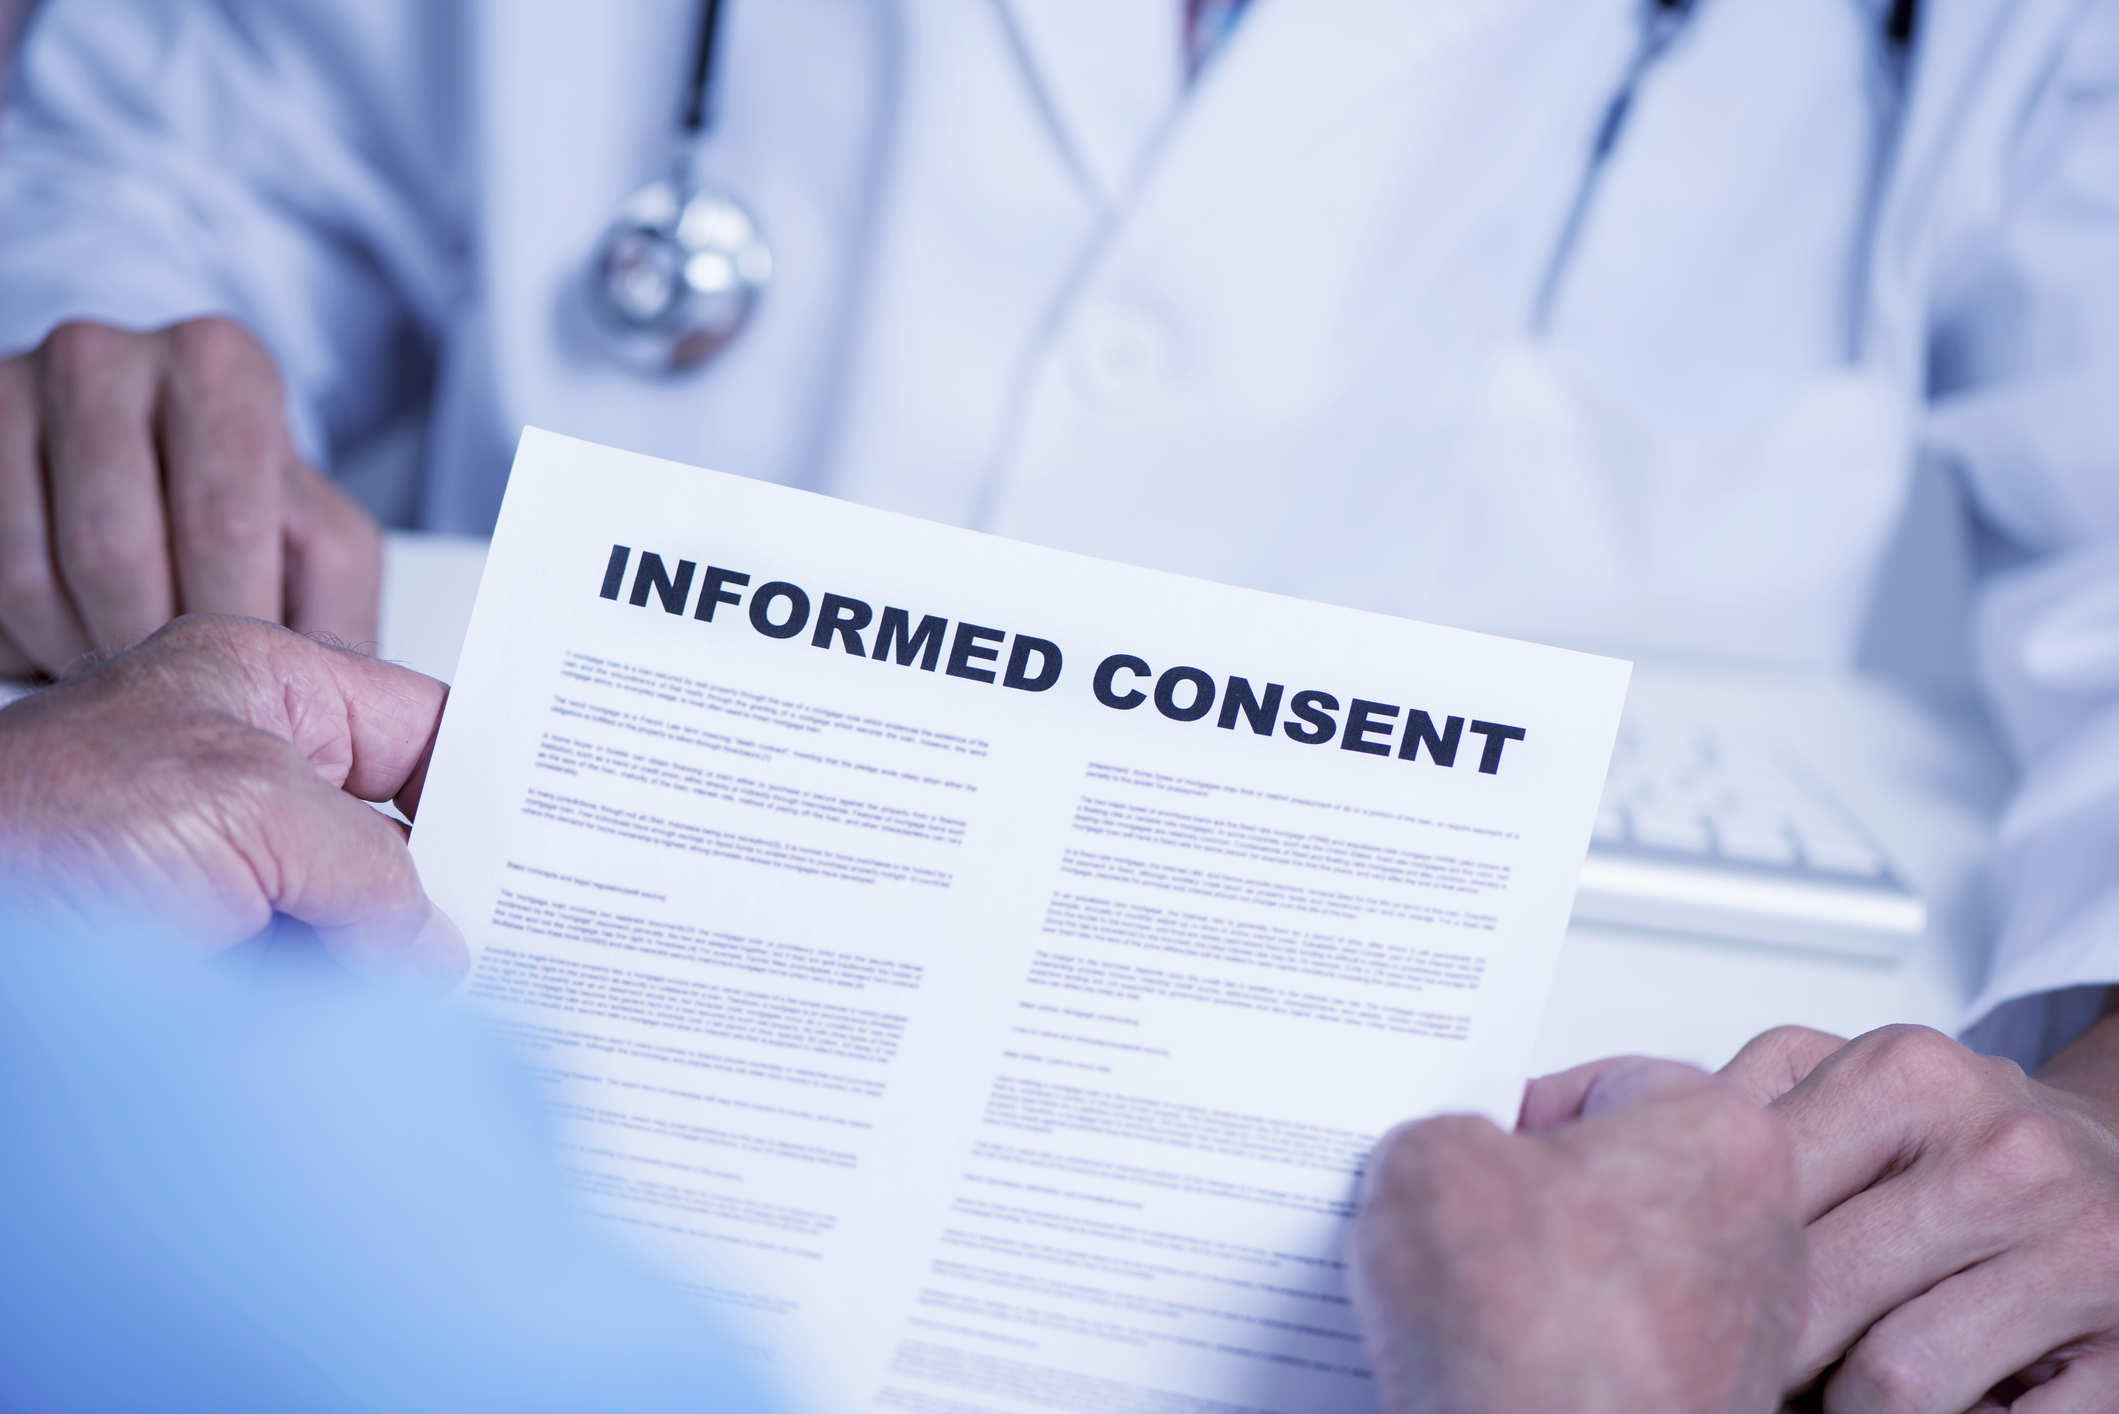 FDA Finalizes Rule for Waiver or Alteration of Informed Consent in Limited Circumstances